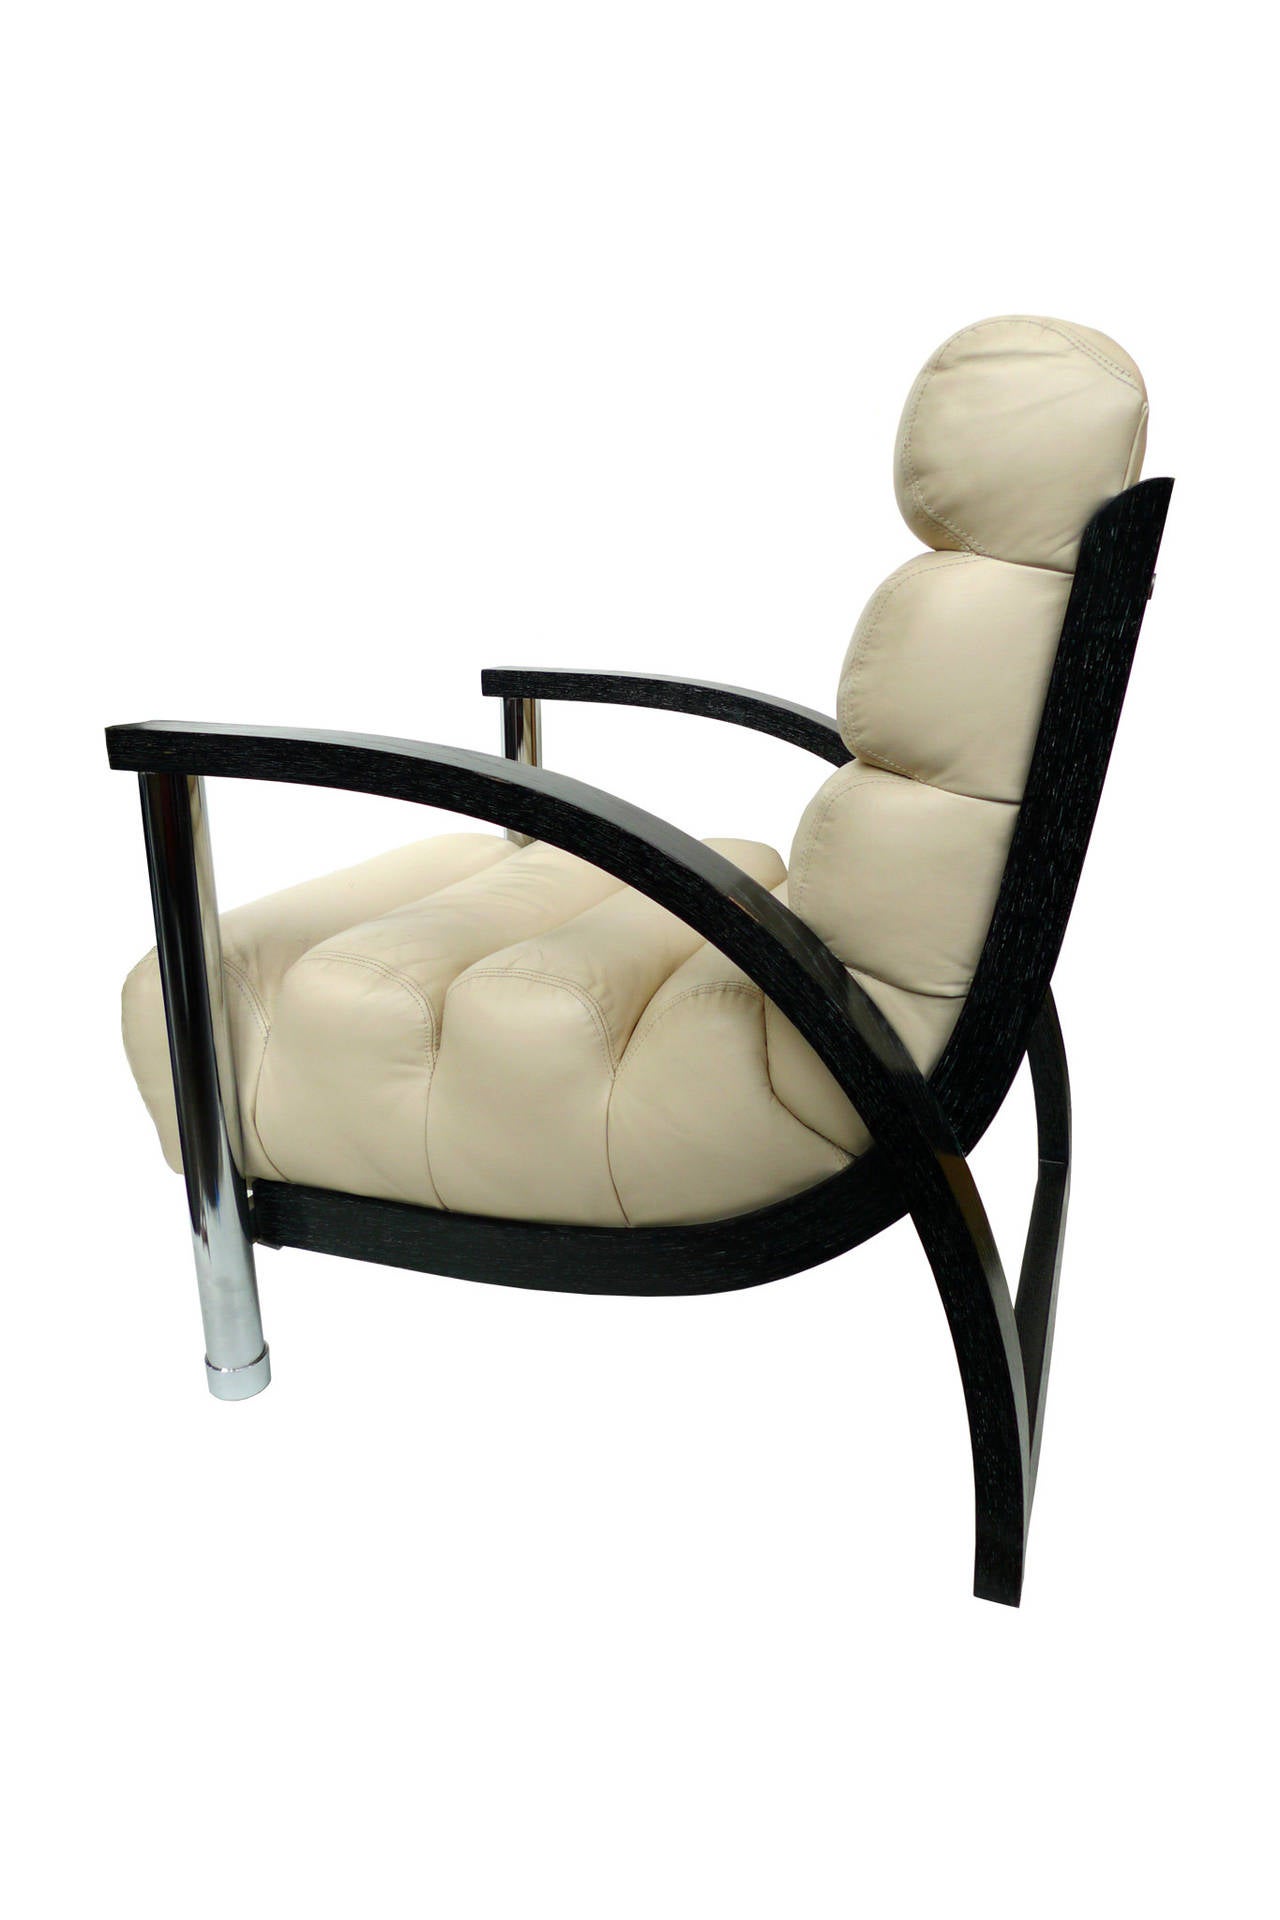 These handsome lounge chairs are designed by Jay Spectre, renowned for his hybrid furniture incorporating hard and soft materials and pulling from Art Deco and modern designs. These eclipse chairs have cerused oak arms and frames, chromed steel